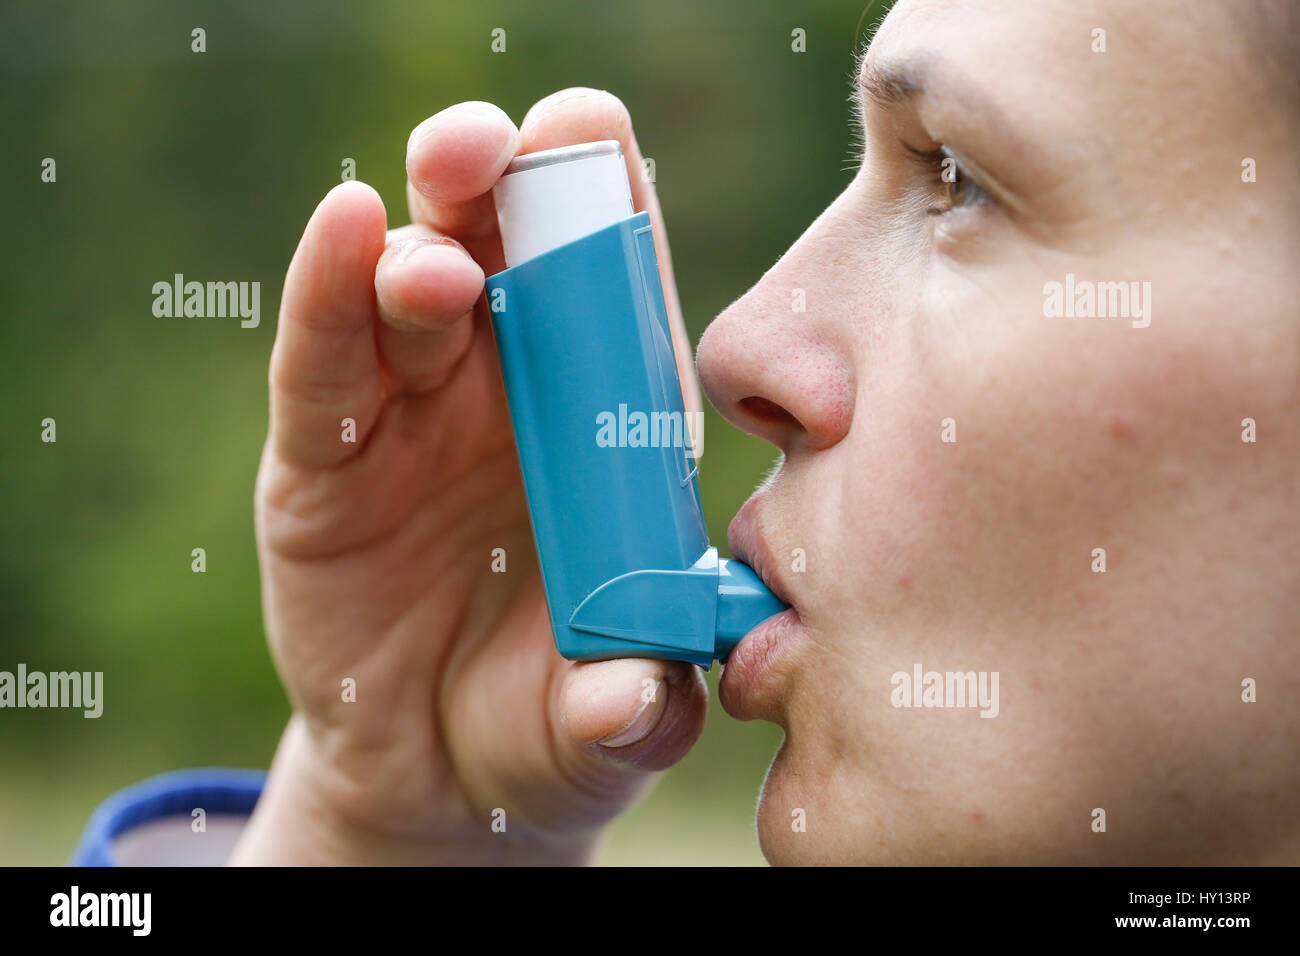 Asthma patient inhaling medication for treating shortness of breath and wheezing. Chronic disease control, allergy induced asthma remedy and chronic p Stock Photo